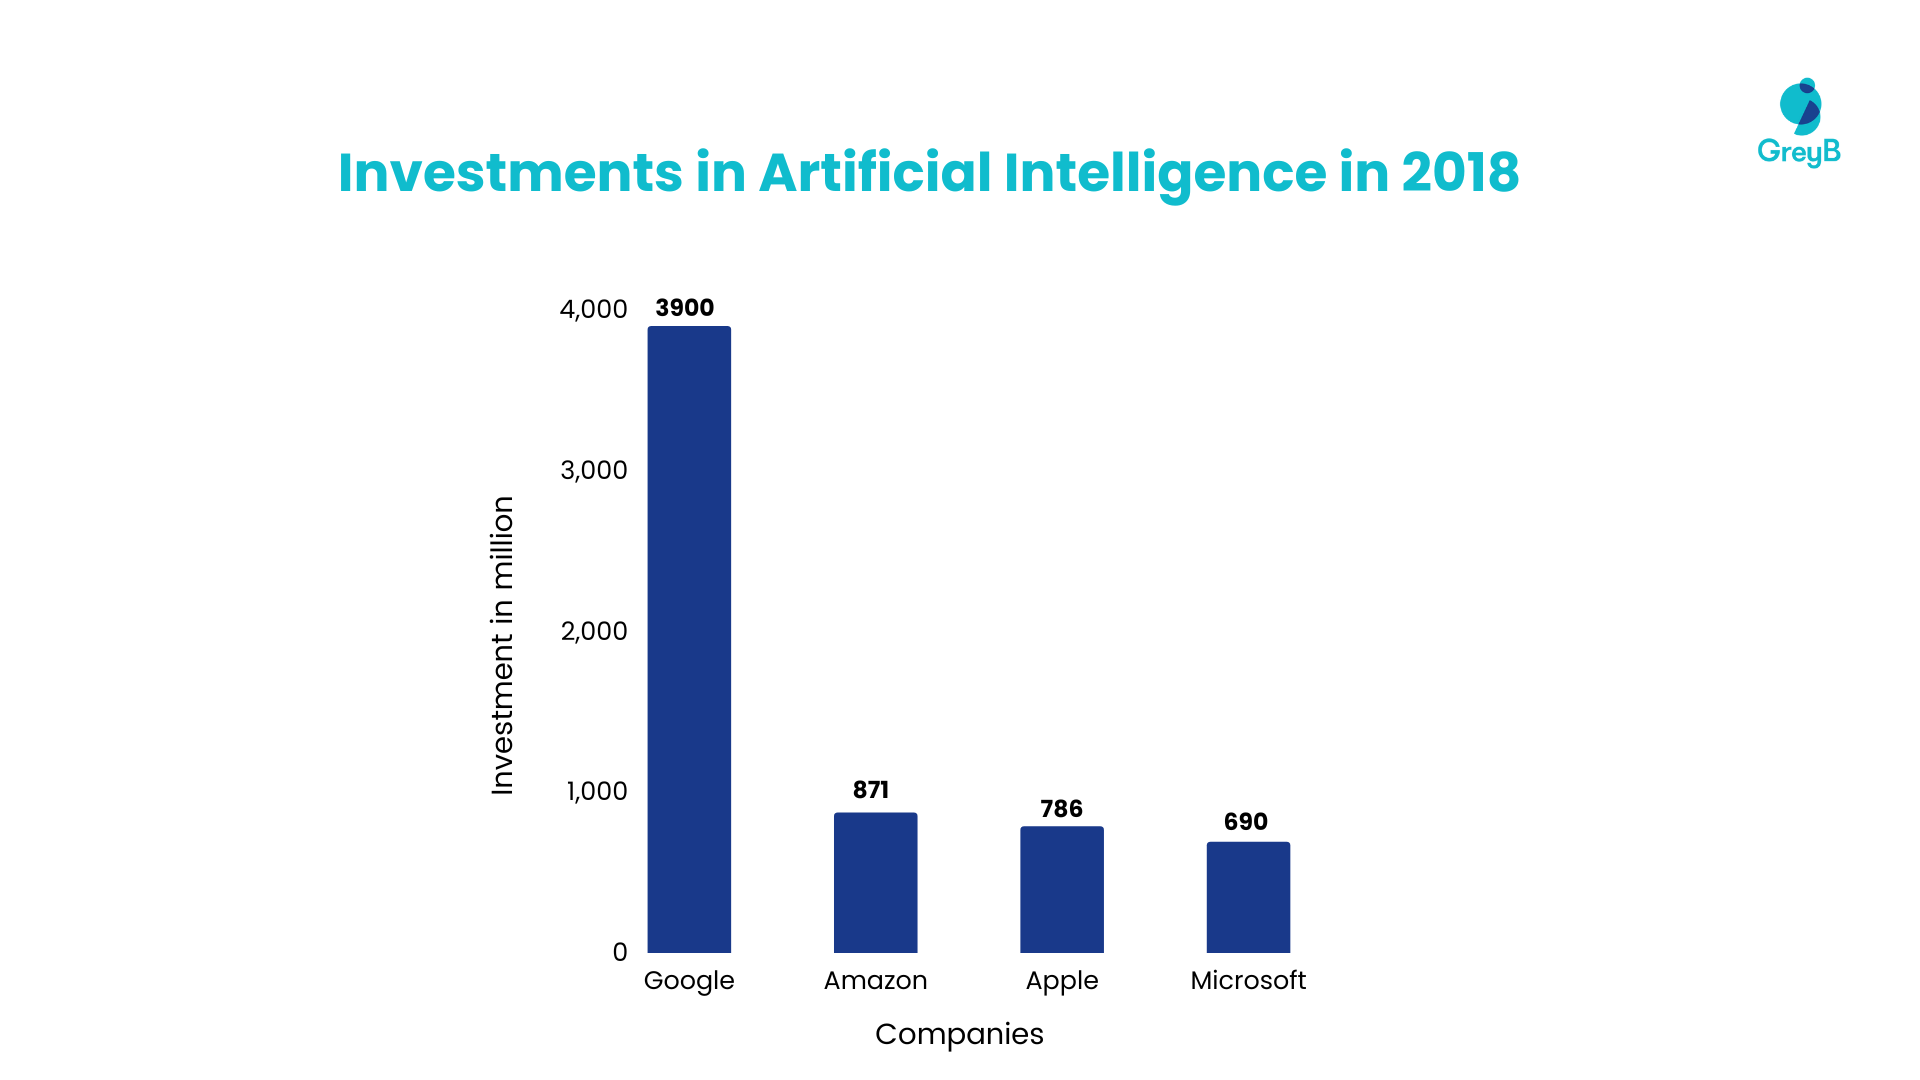 investment-made-by-companies-in-artificial-intelligence-in-2018